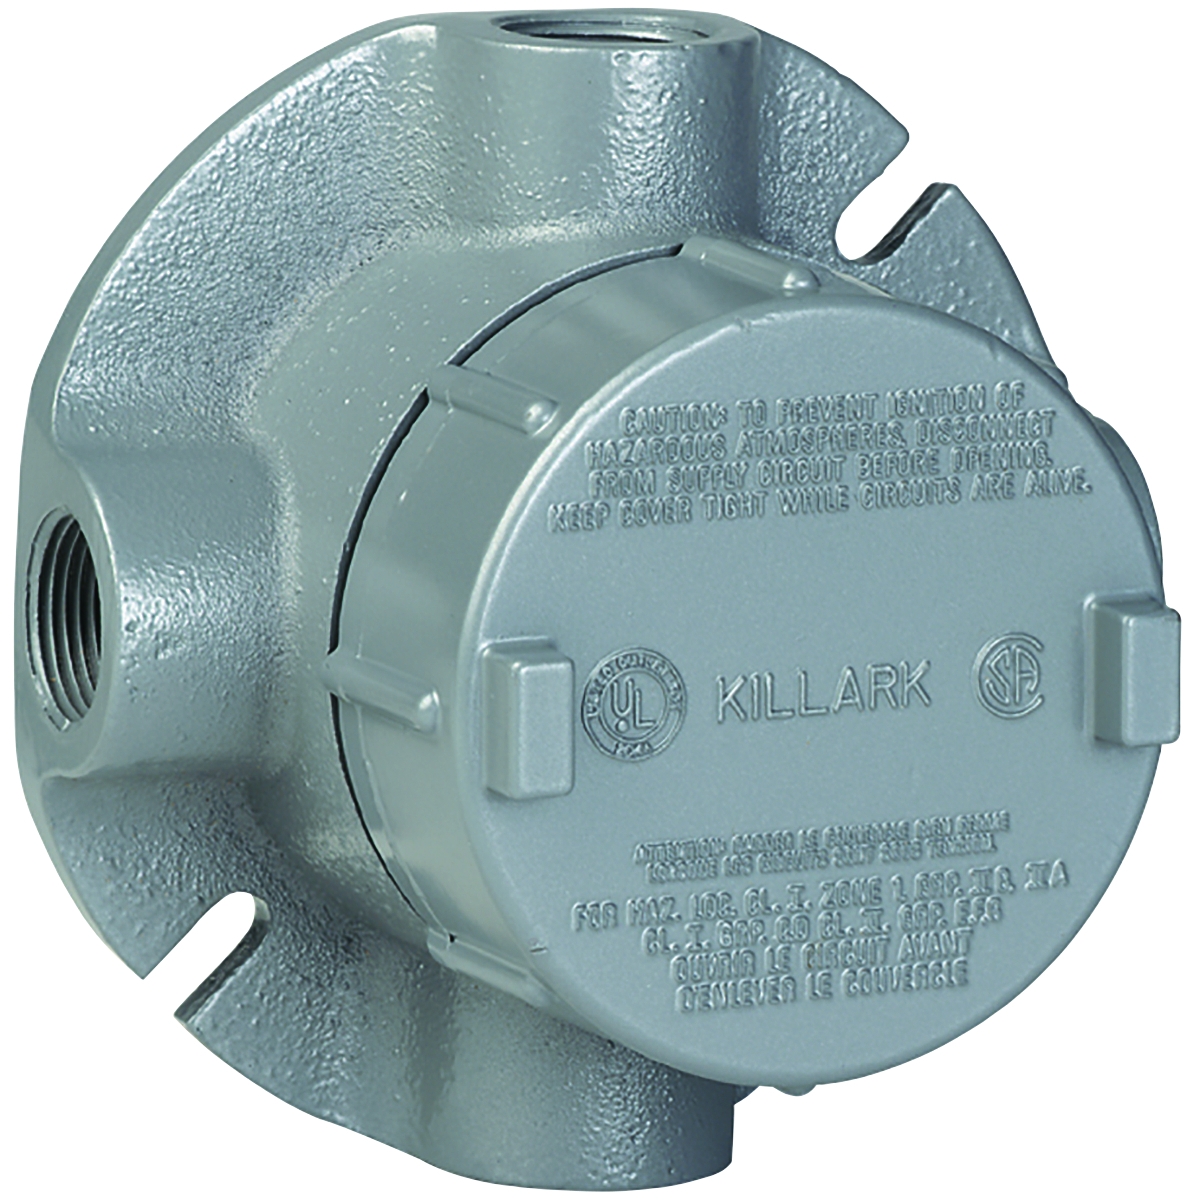 GEC SERIES FITTINGS - IRON - OUTLET BODIES WITH MOUNTING FLANGE - XTFTYPE OUTLET BODY - HUB SIZE 3/4 IN - VOLUME 19.0 CU IN